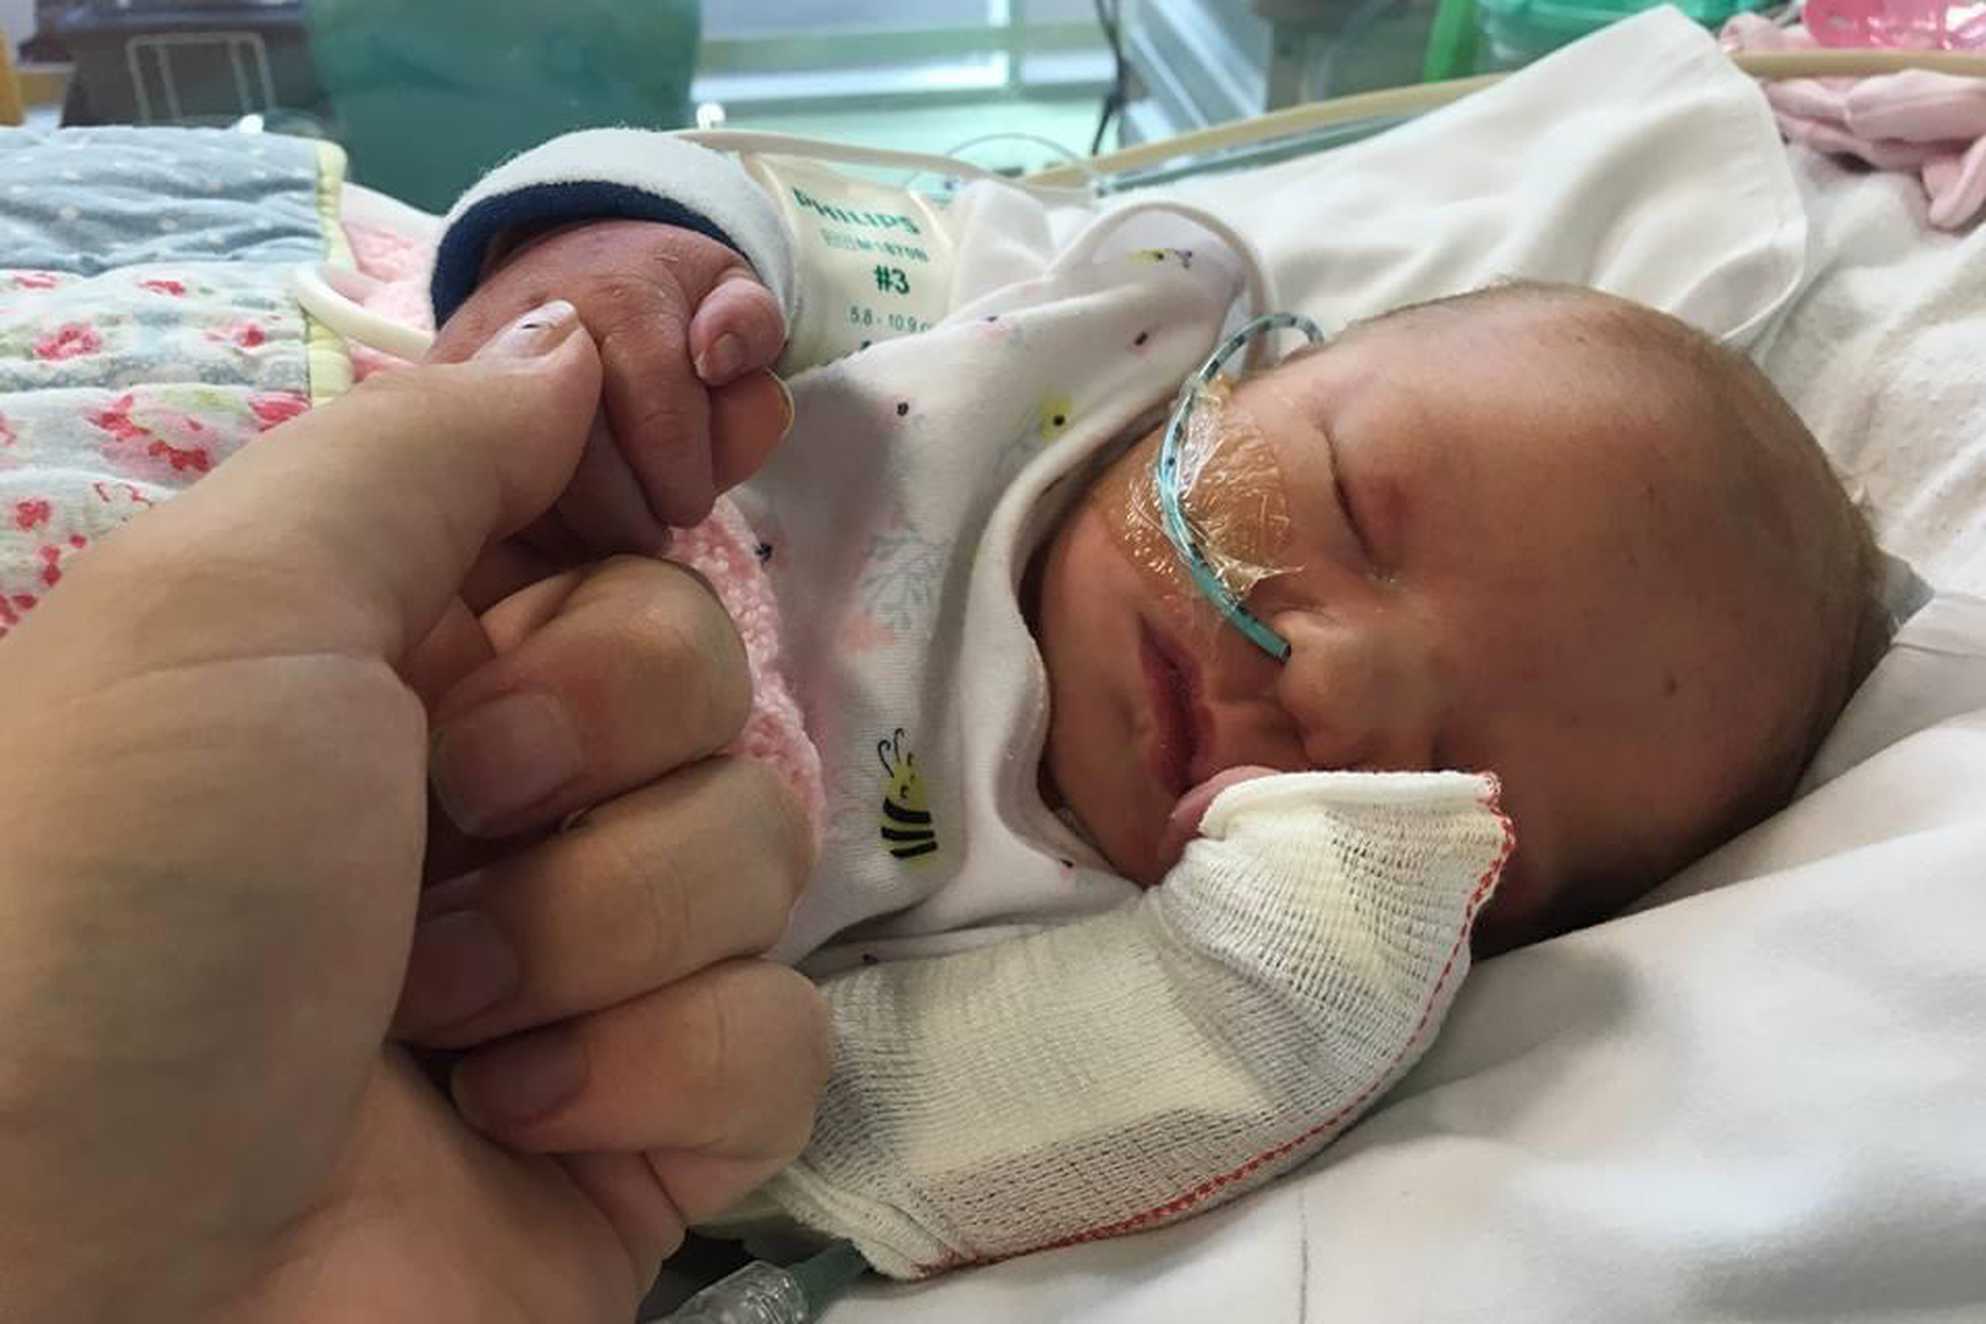 Charlotte in hospital as a baby, holding her mum's hand.